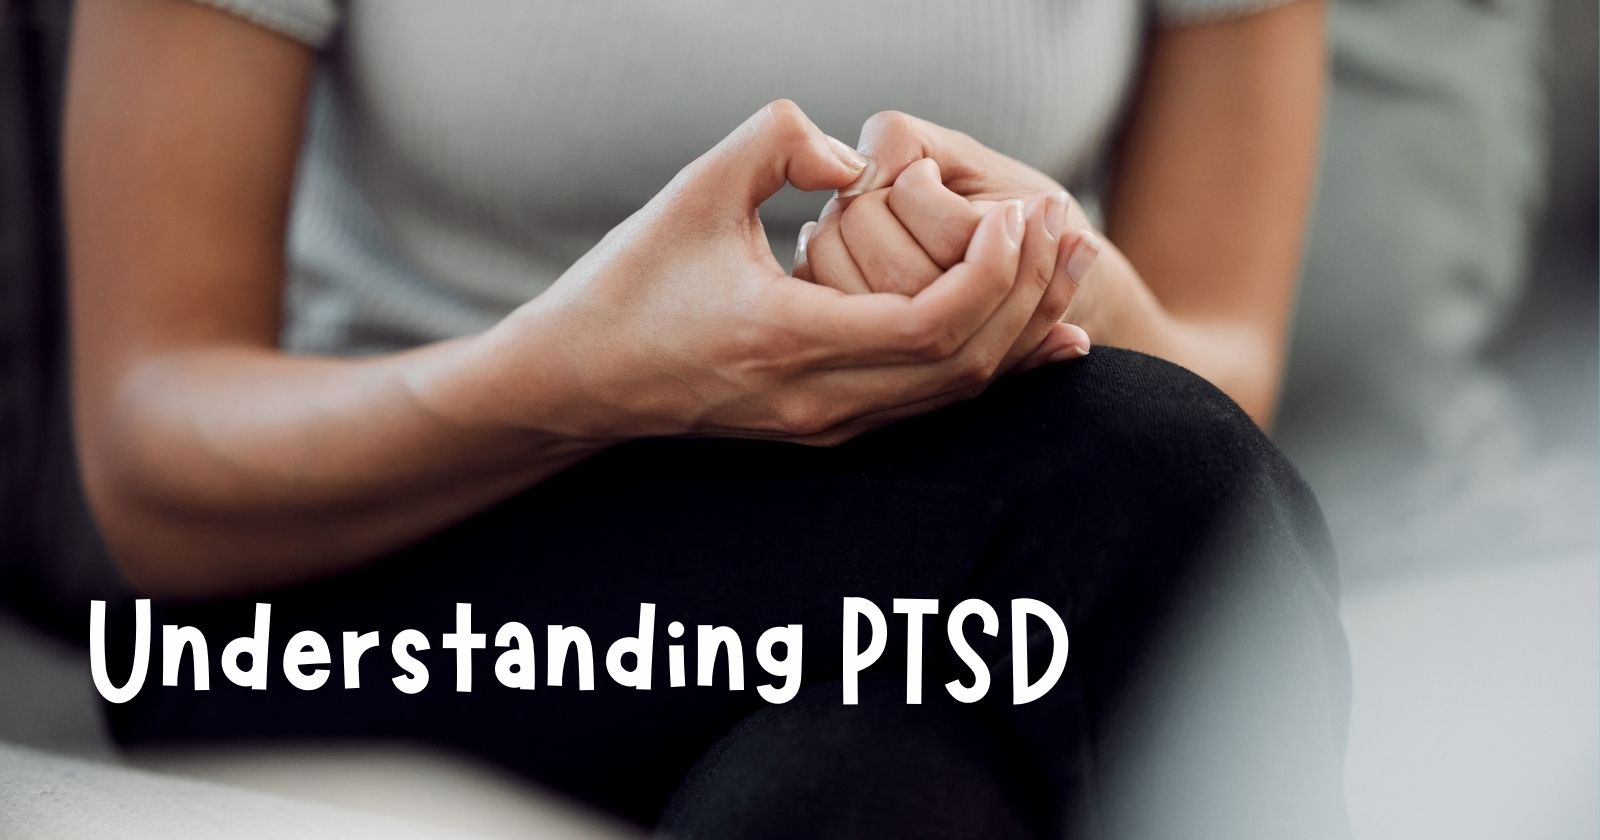 Understanding PTSD
Women in anxiety, playing with fingers